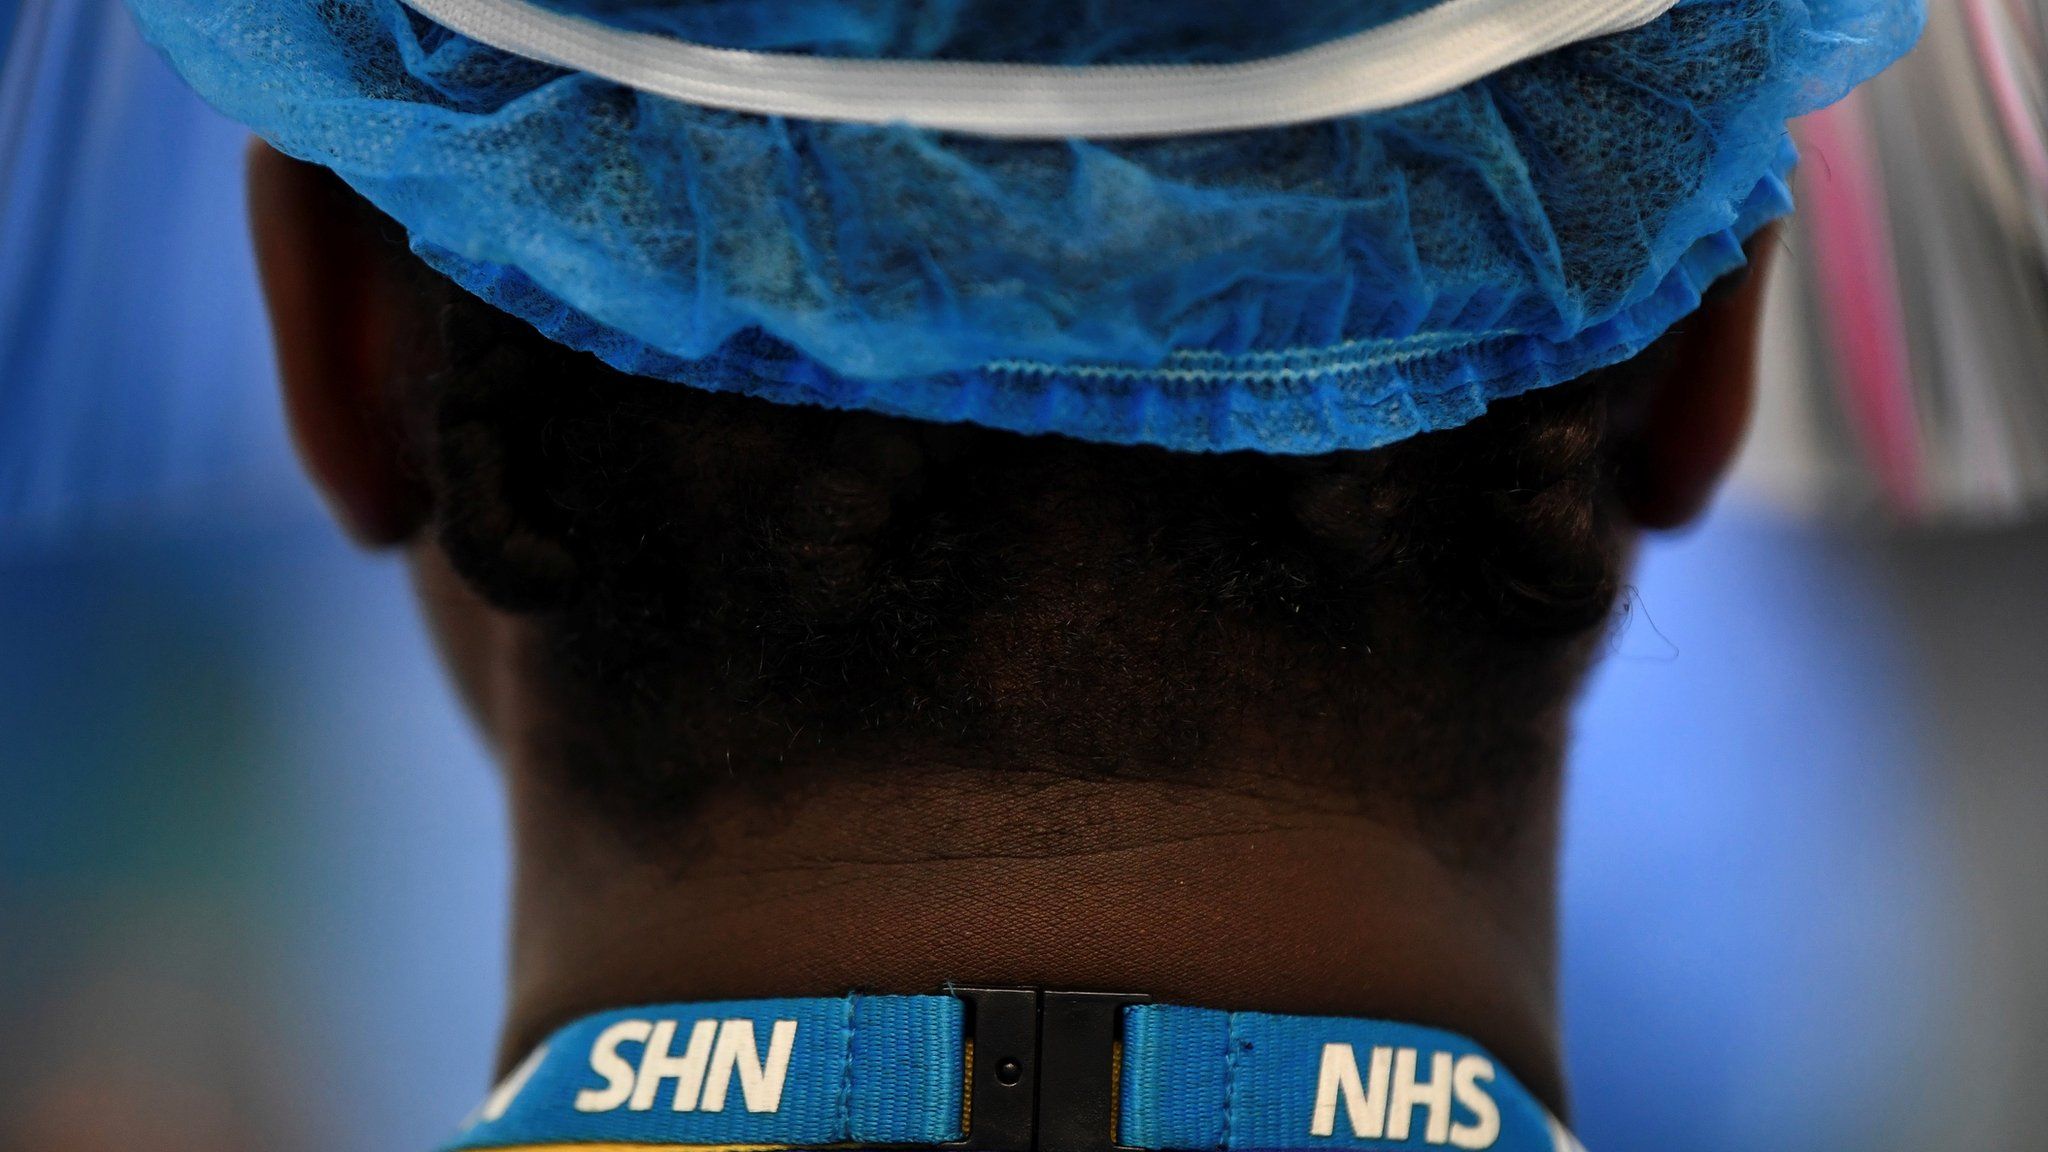 Healthcare worker wearing an NHS lanyard seen from behind